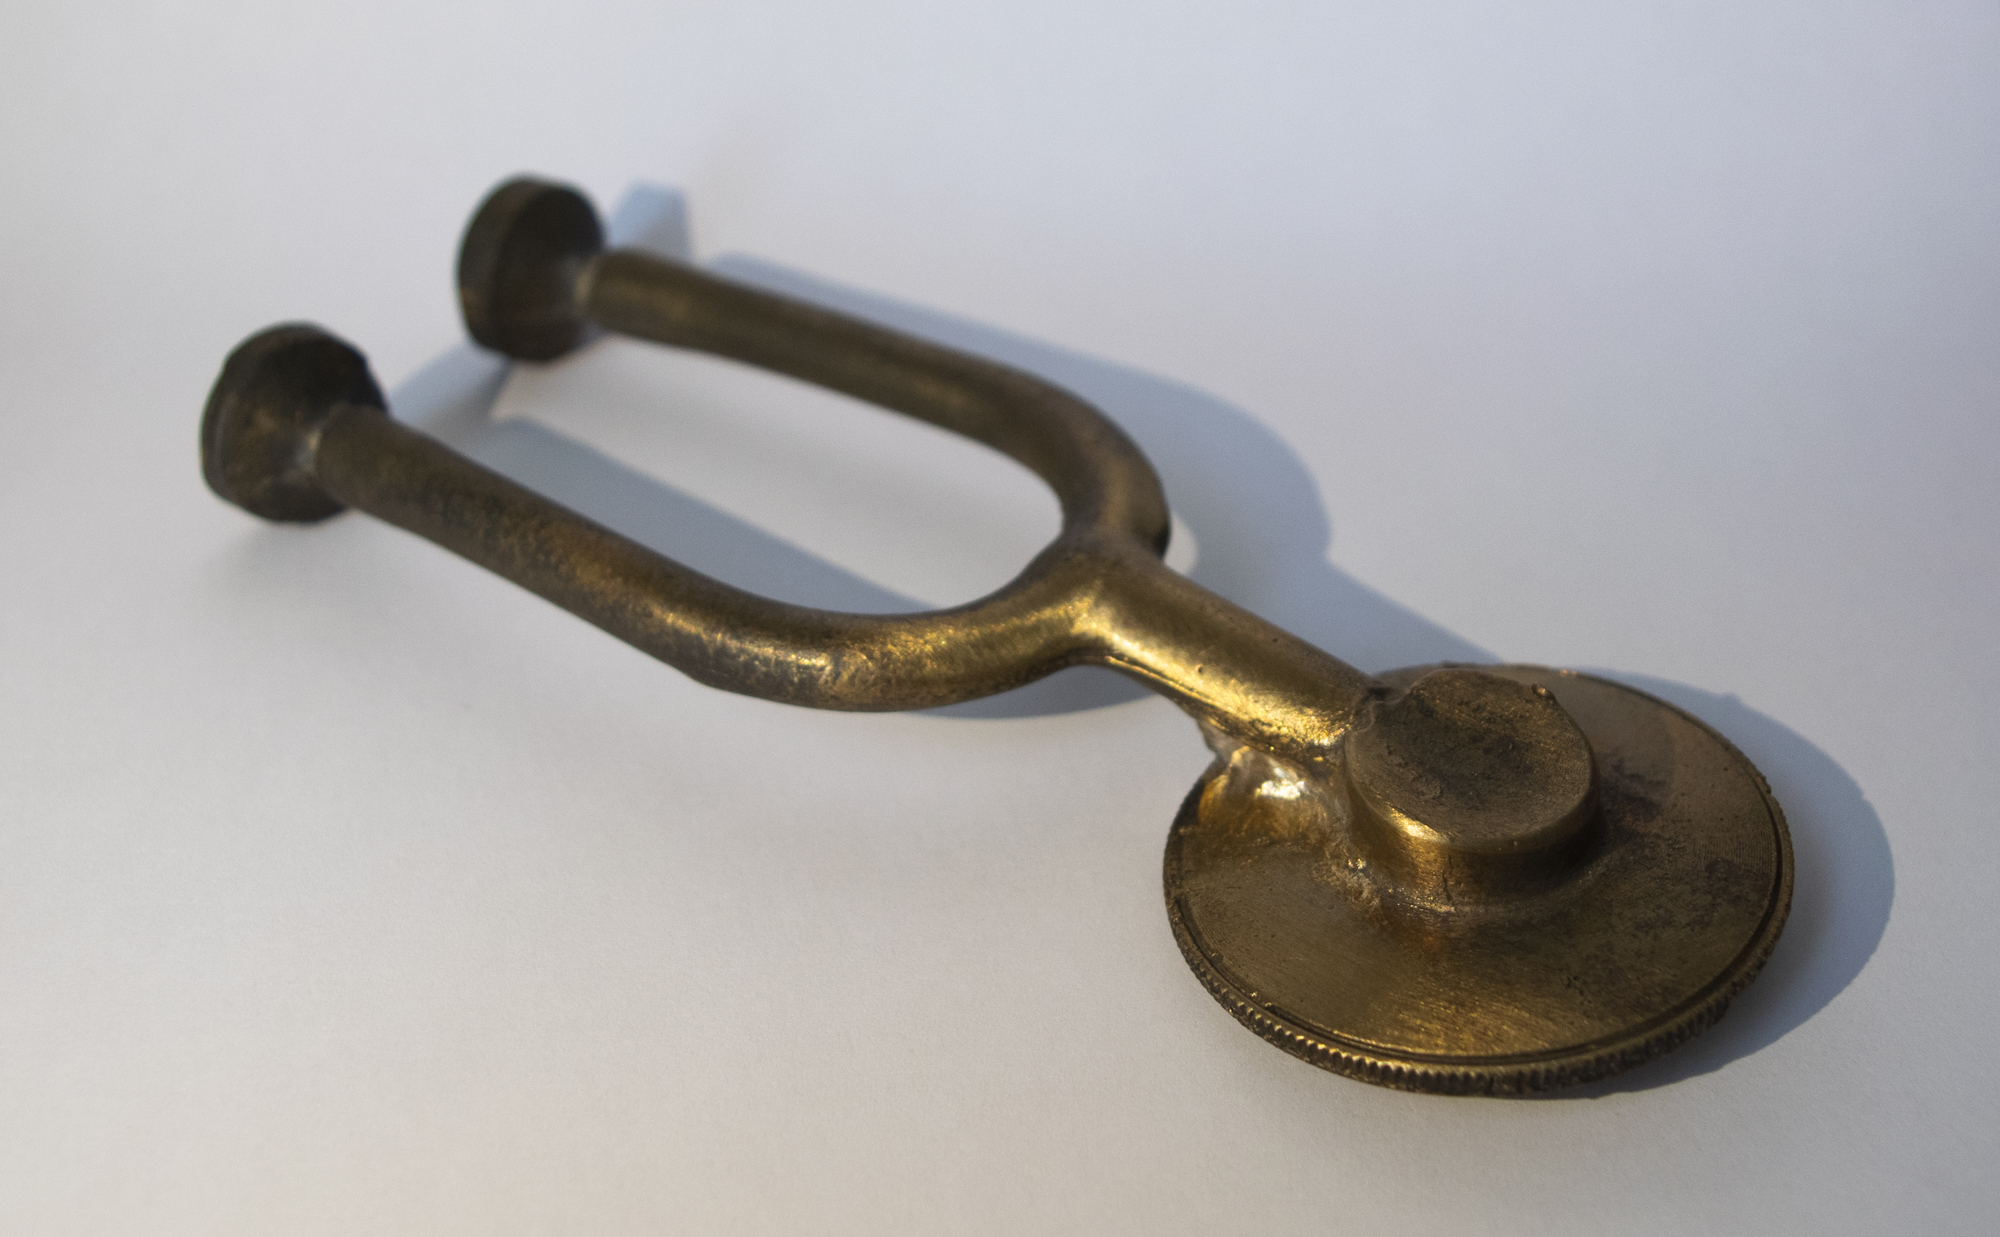 BA Fine Art work by Freya Parfitt showing a bronze cast, similar in shape to a stethoscope but shorter and featuring funnels instead of earpieces.